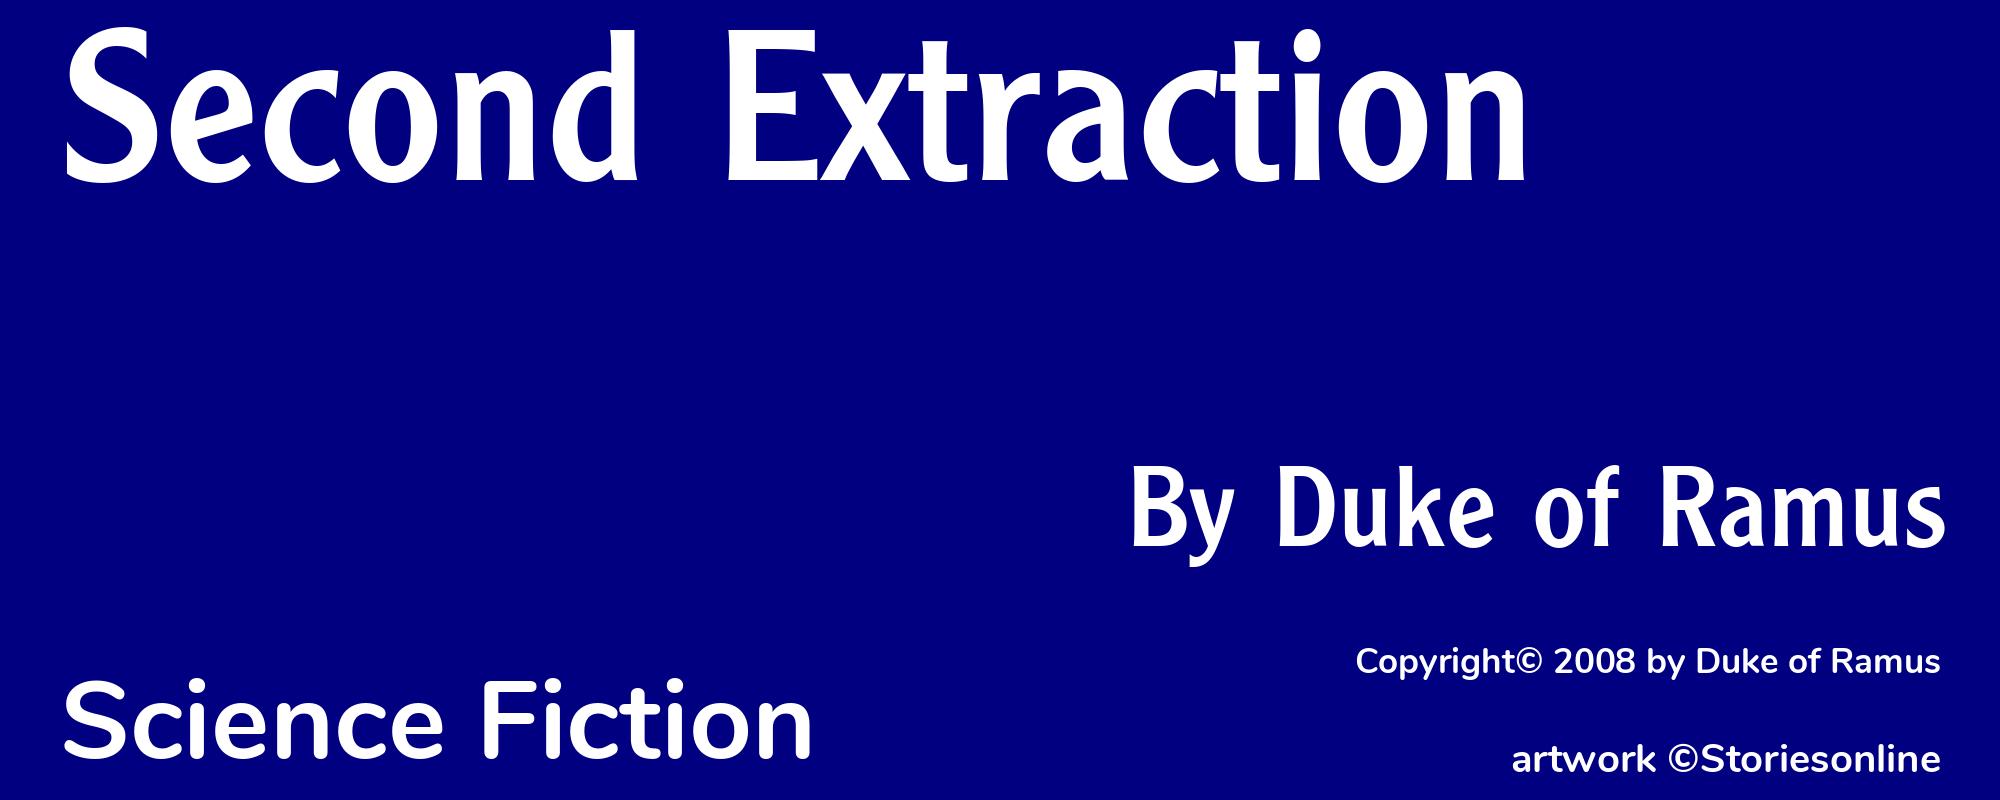 Second Extraction - Cover